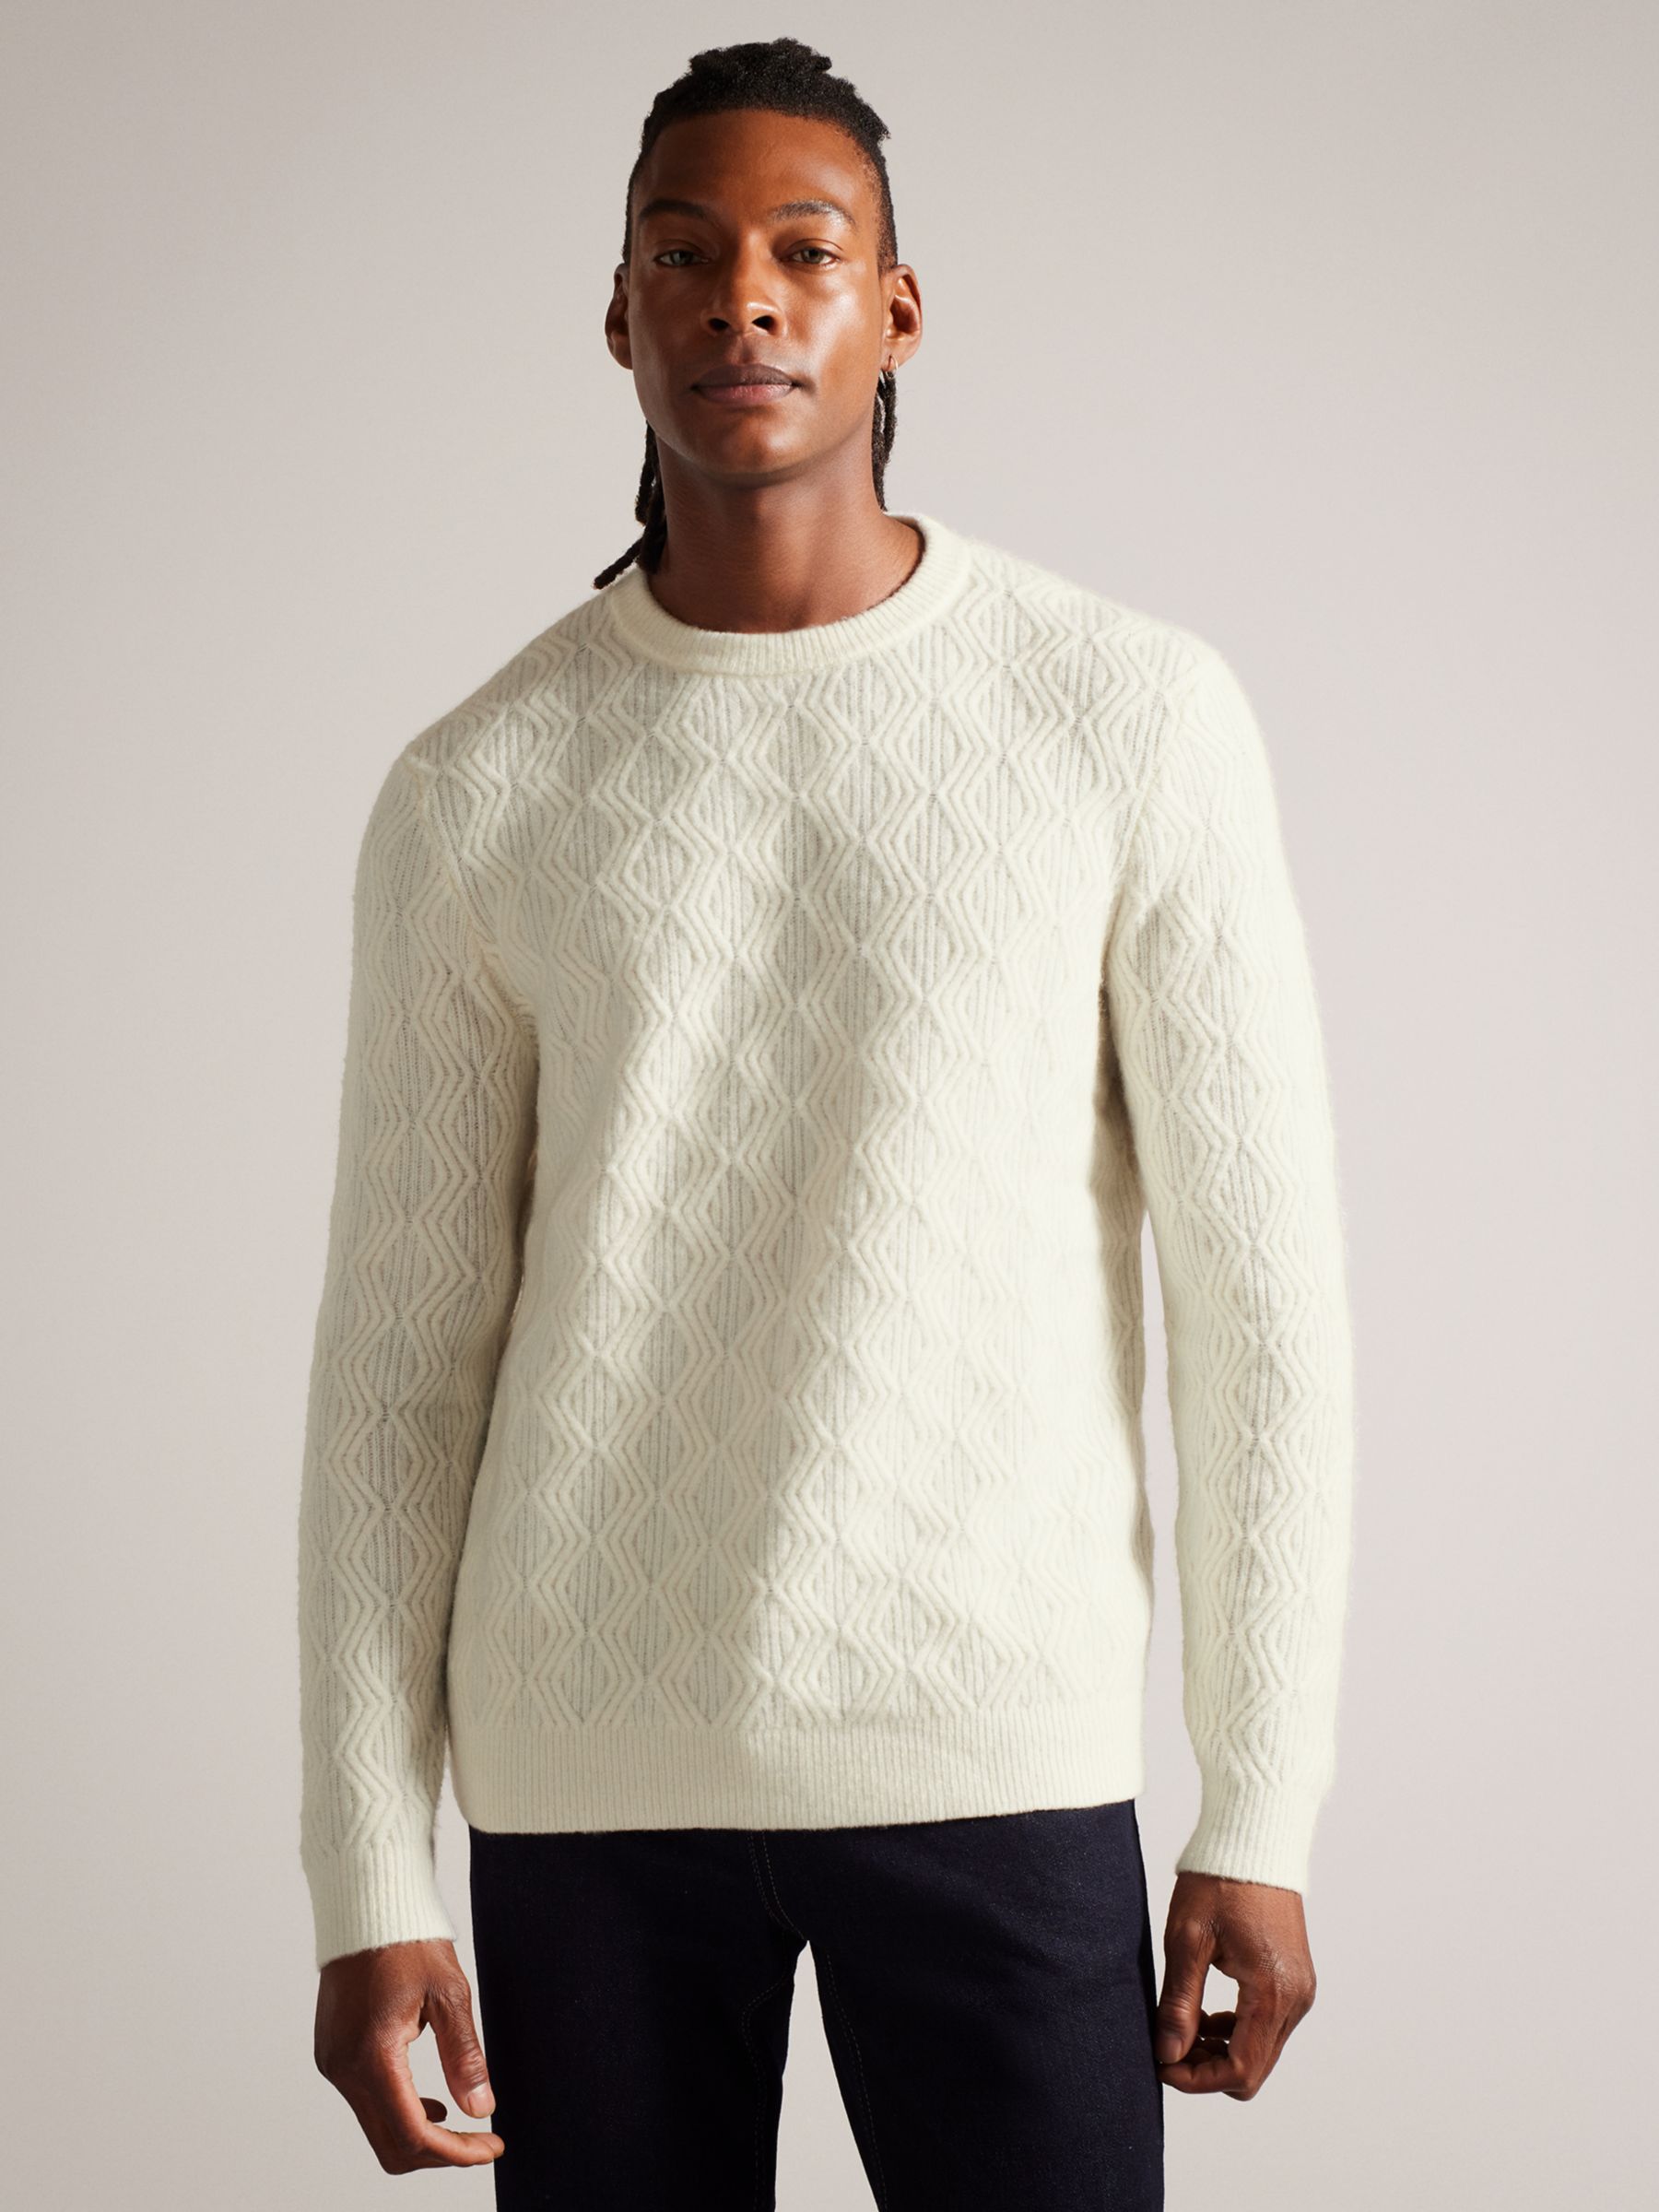 Ted Baker Atchet Long Sleeve Textured Cable Crew Neck Jumper, White, XS